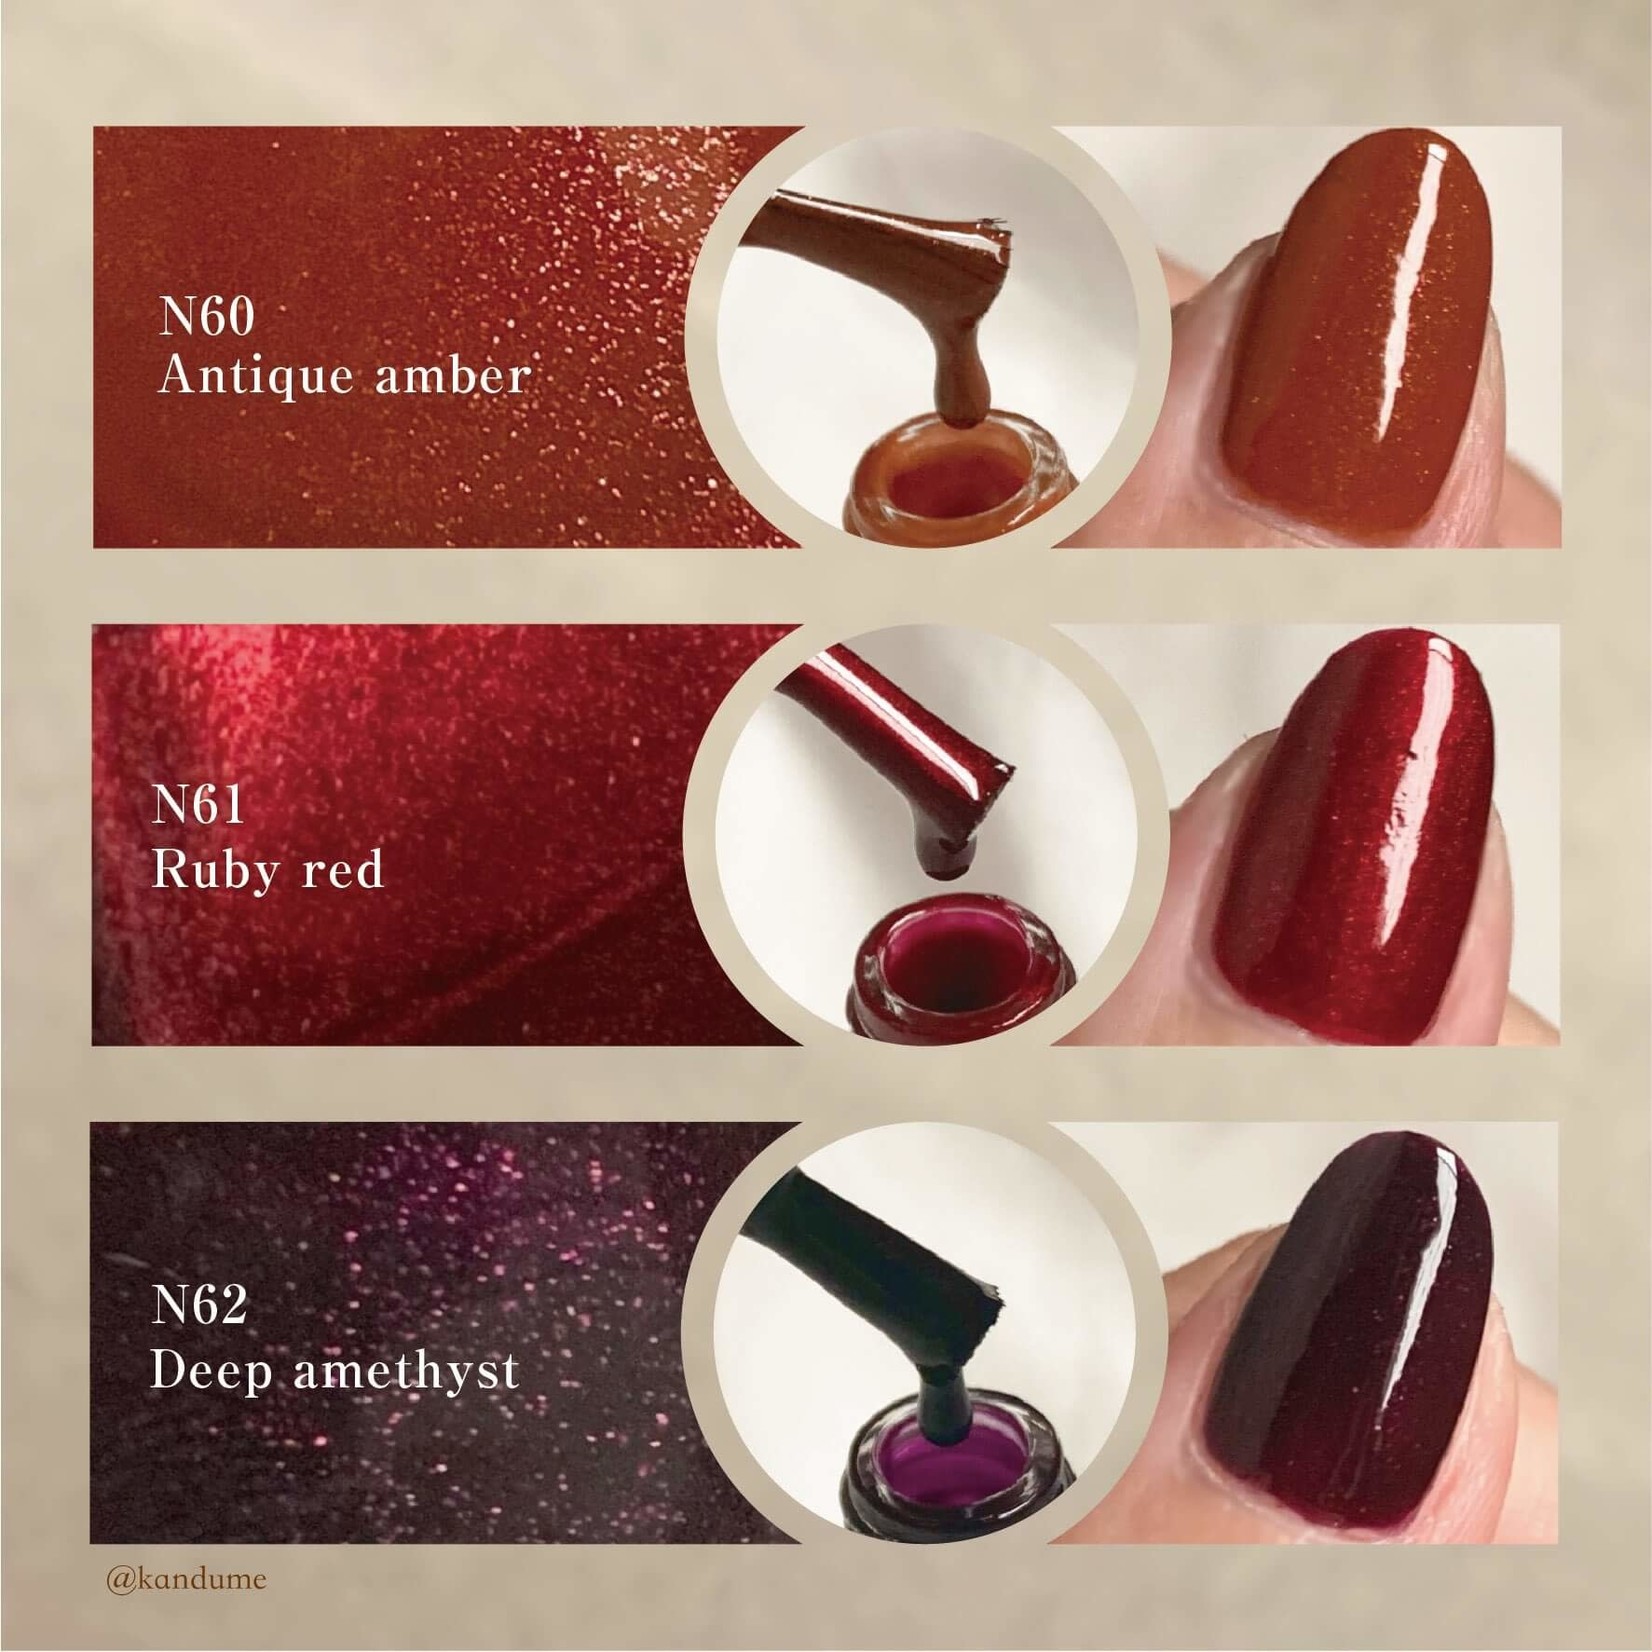 Canmake Canmake Colorful Nails N61 Ruby Reb